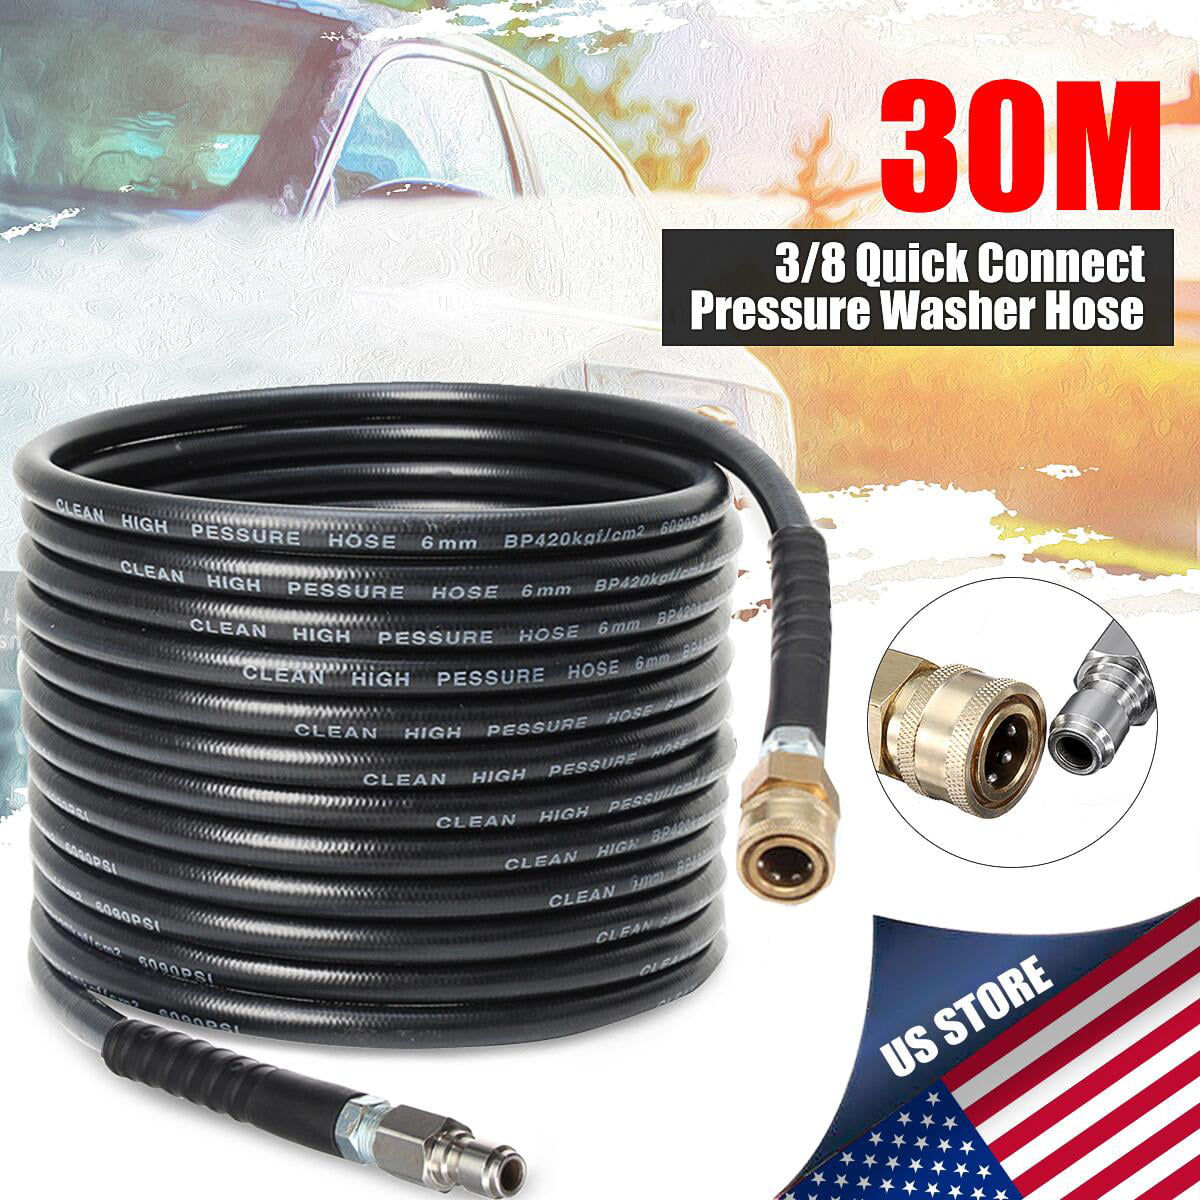 10-30M Pressure Washer Hose Pipe Jet Wash Clean 40MPa for Karcher Series 5800PSI 